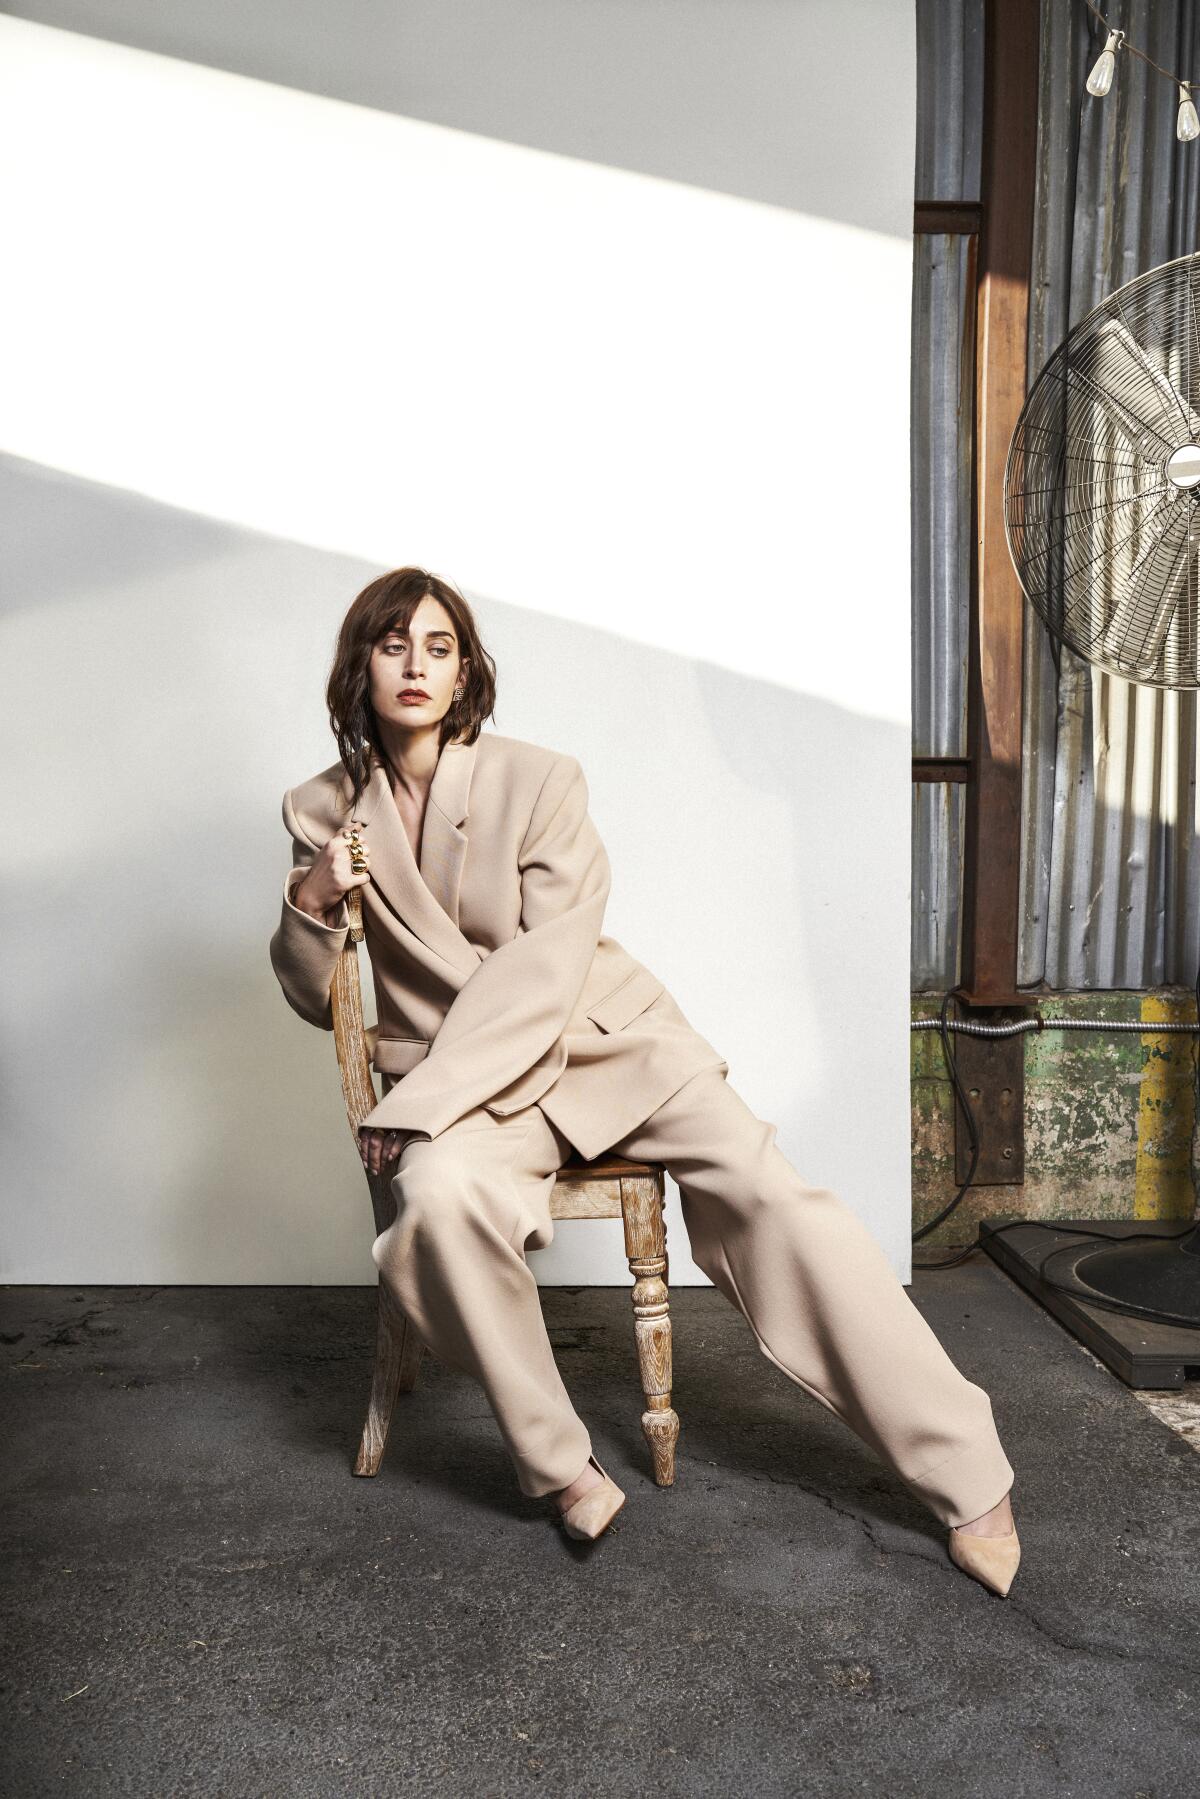 Lizzy Caplan, in an oversized suit, poses askew on a wooden chair. 